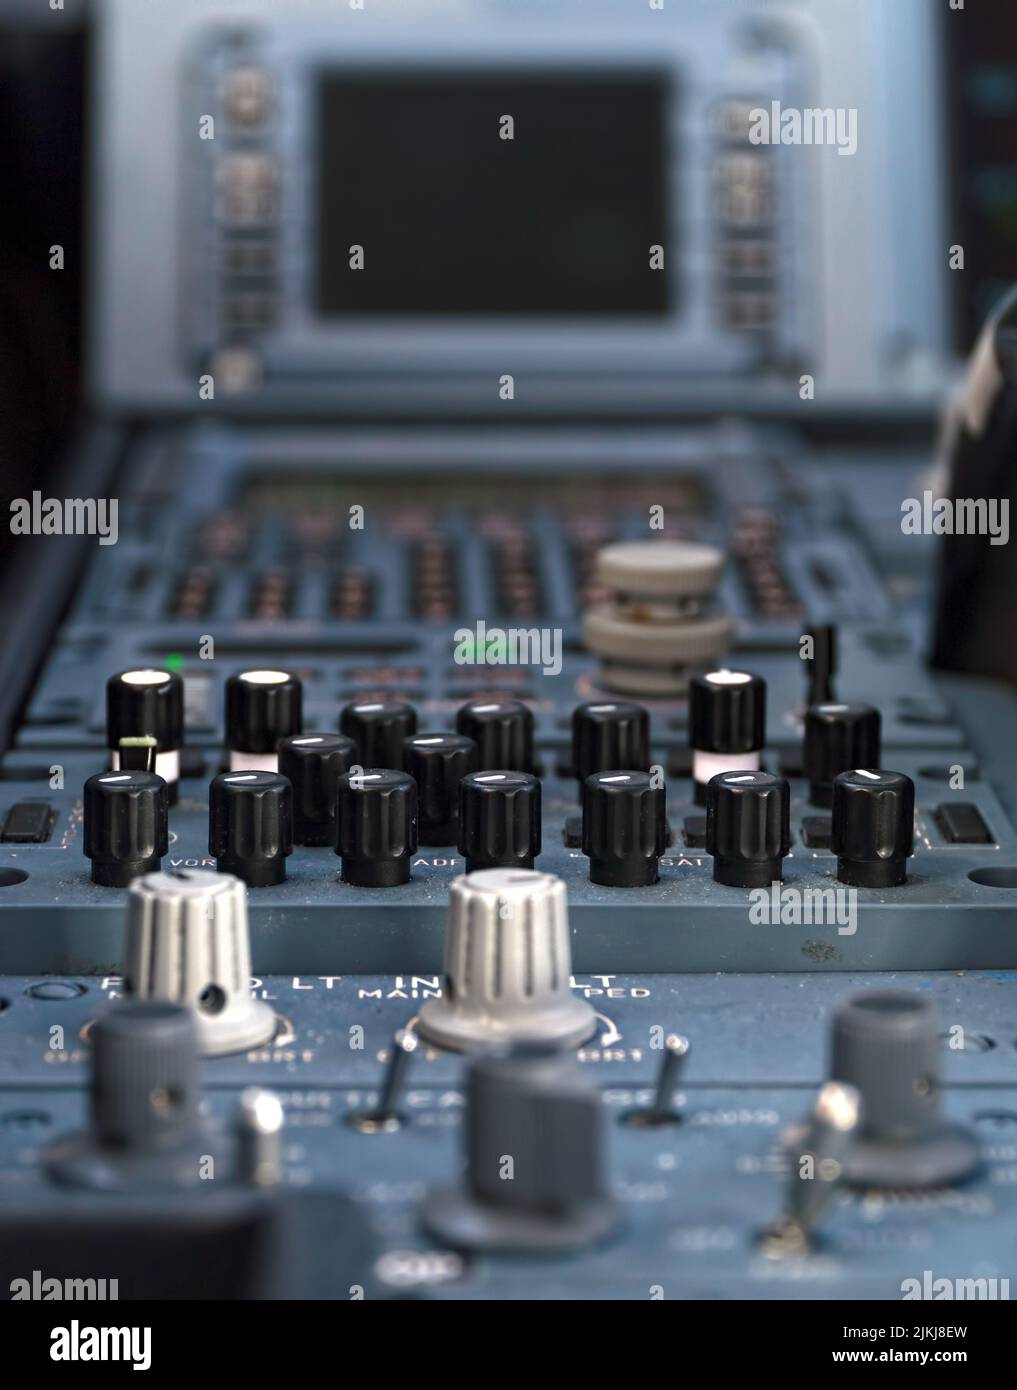 A closeup shot of radio buttons inside the Airbus 320 cockpit plane Stock Photo